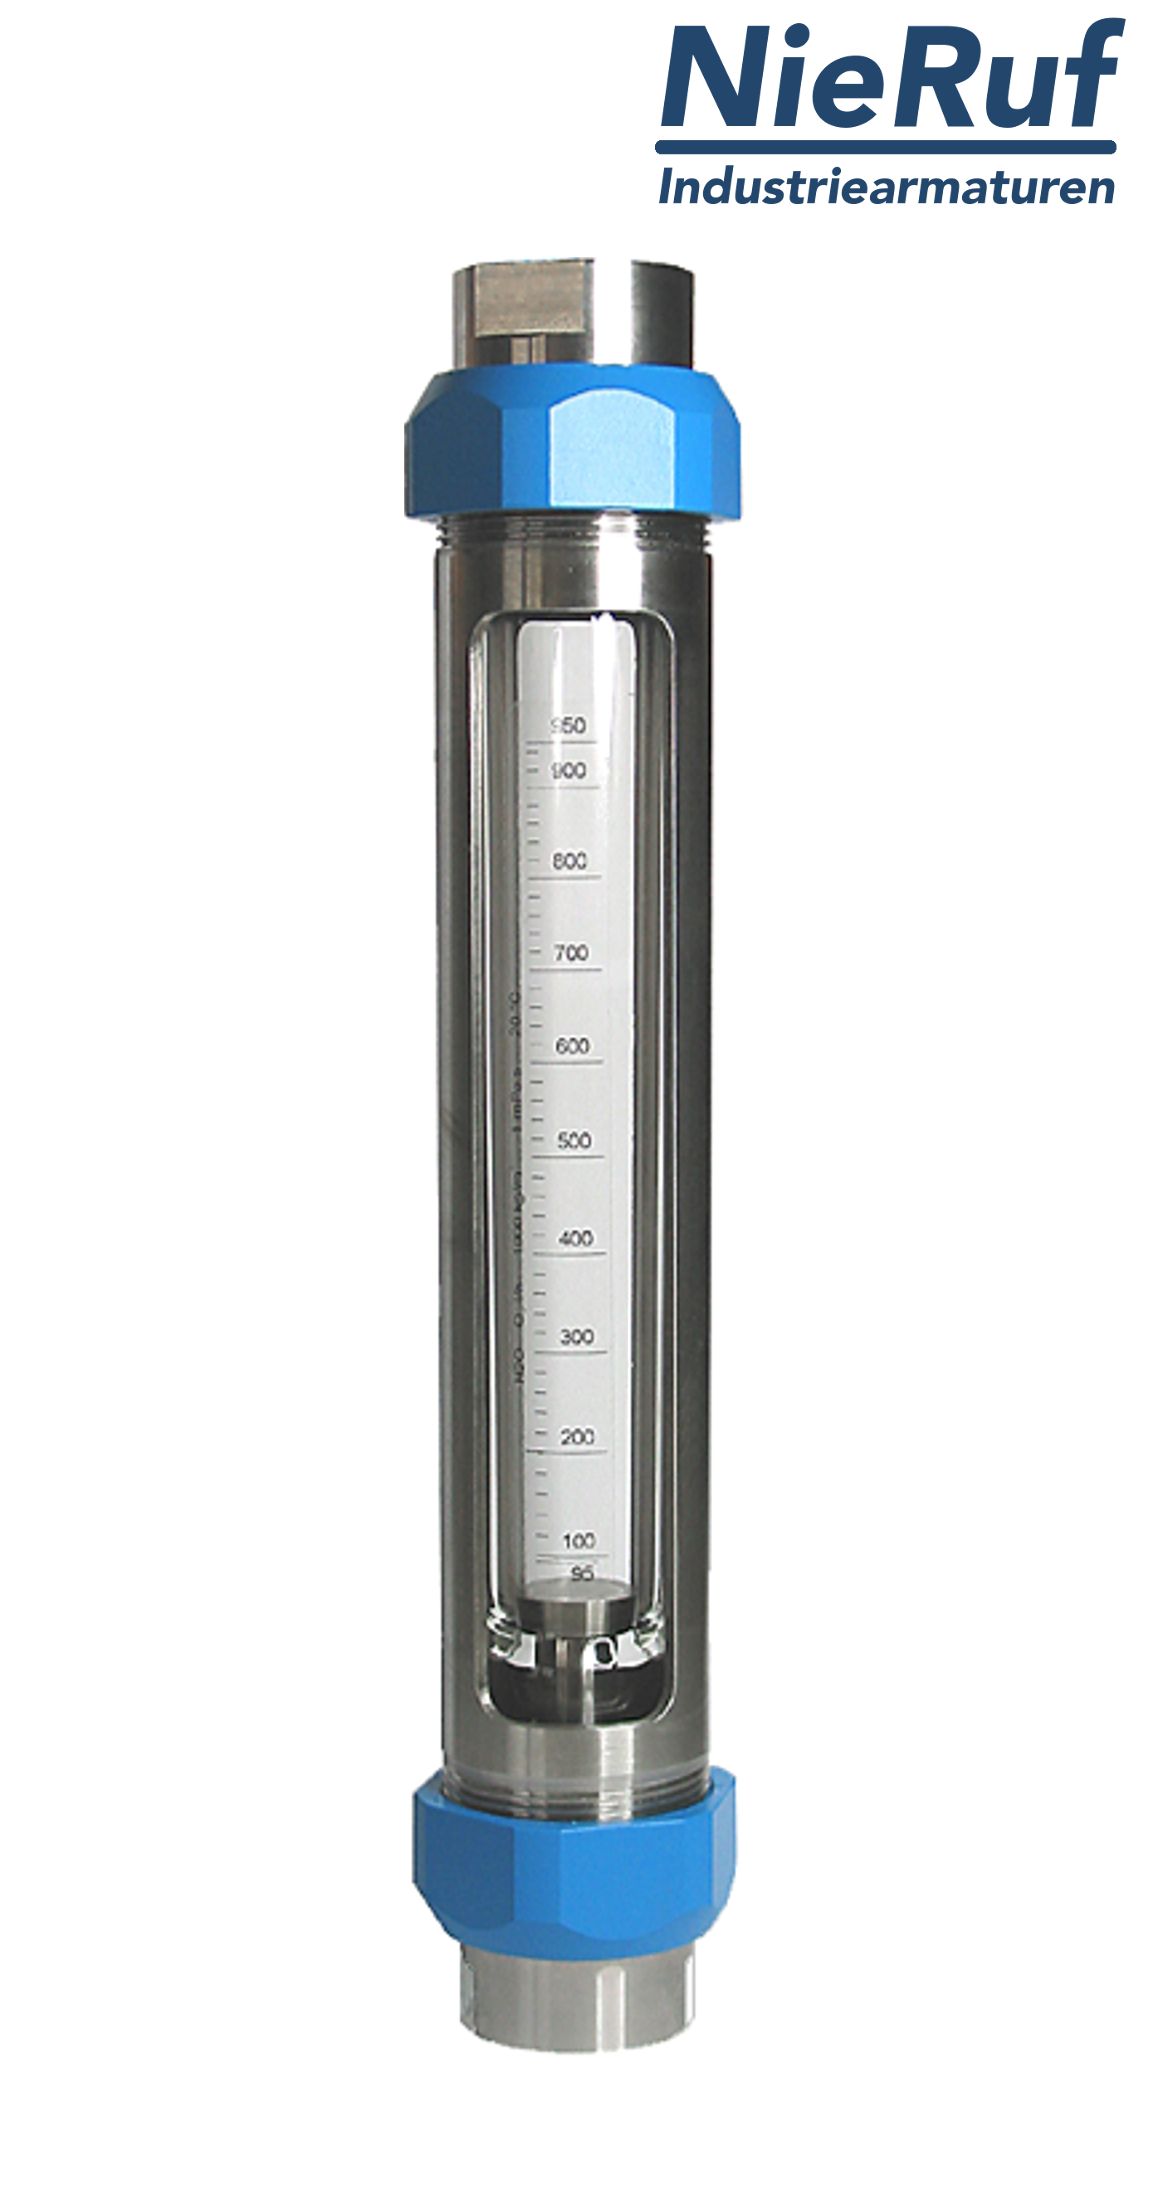 Variable area flowmeter stainless steel + borosilicate 1/2" inch 16.0 - 160 l/h water EPDM